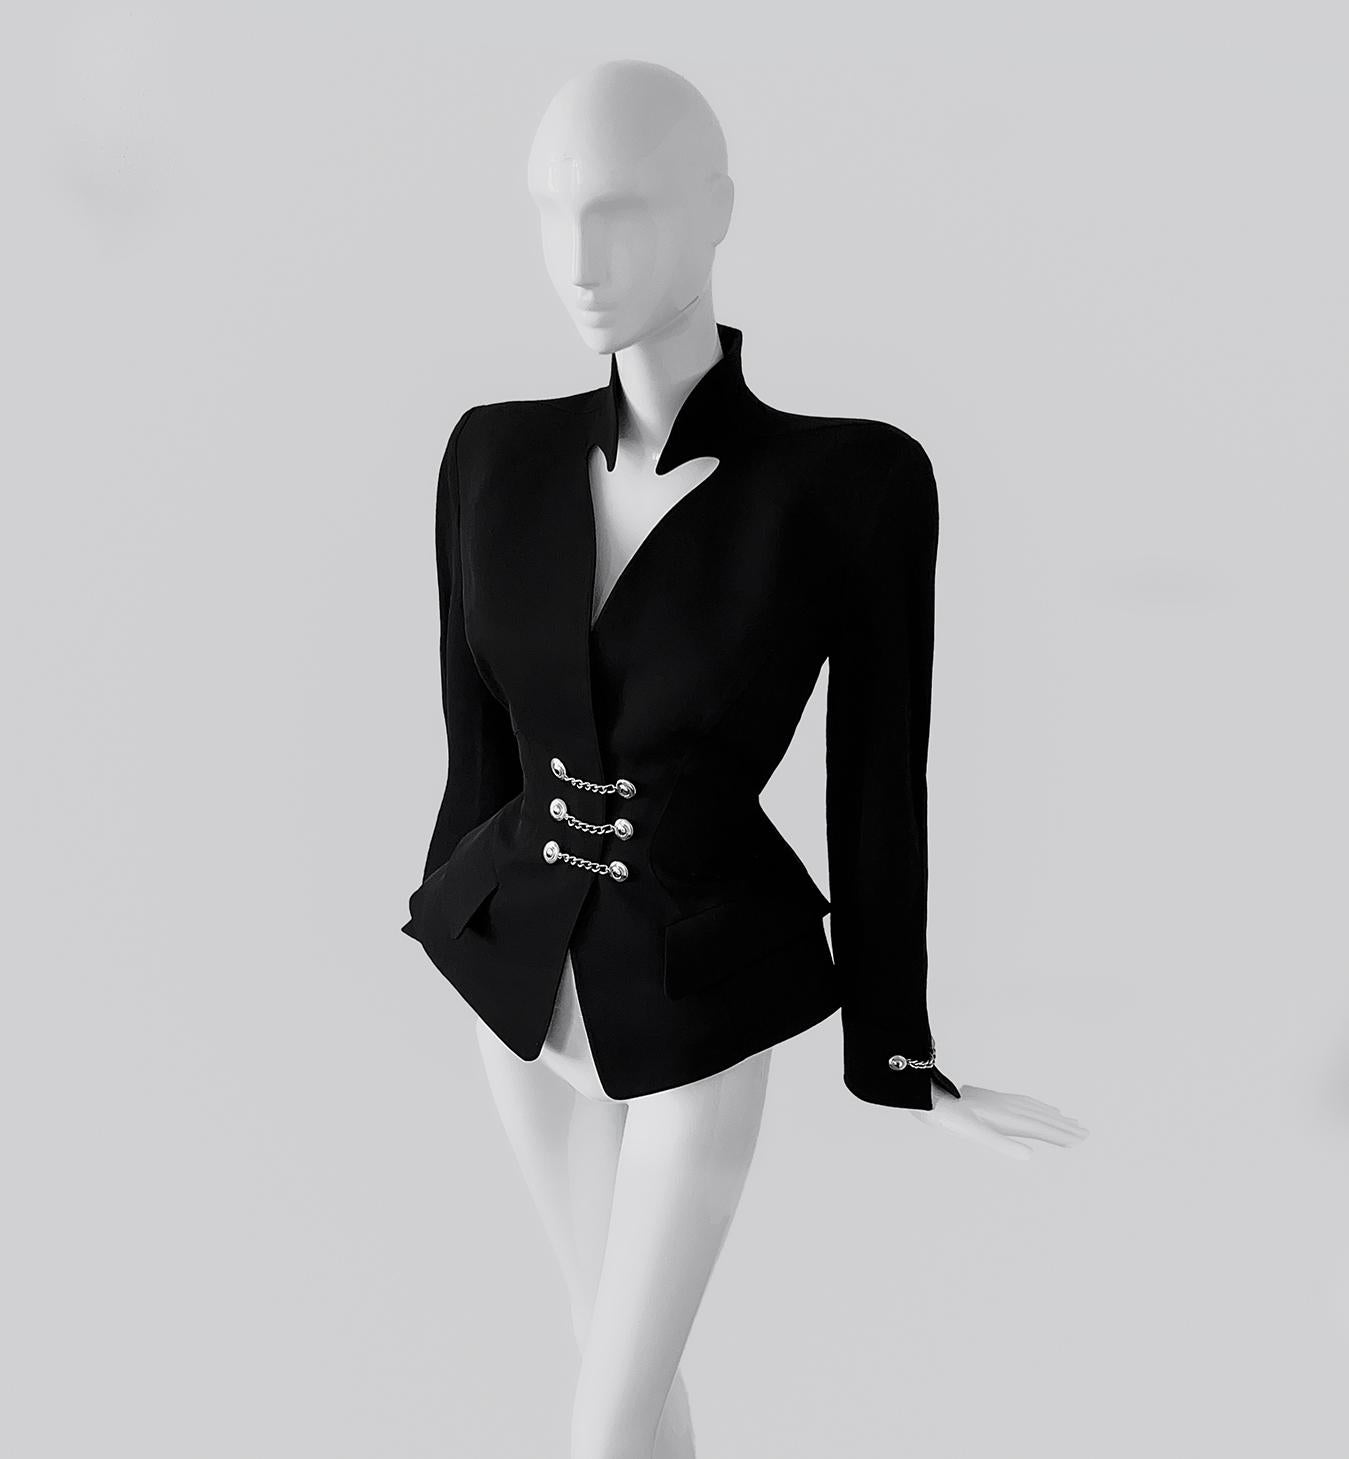 
Fabulous rare Thierry Mugler jacket, FW 1990s Collection.

This dramatic sculptural silhouette is truly spectacular. Extremely rare collectors' piece. Iconic Mugleresque hyper feminine shape with fitted waist and exaggerated hips.
Dramatic